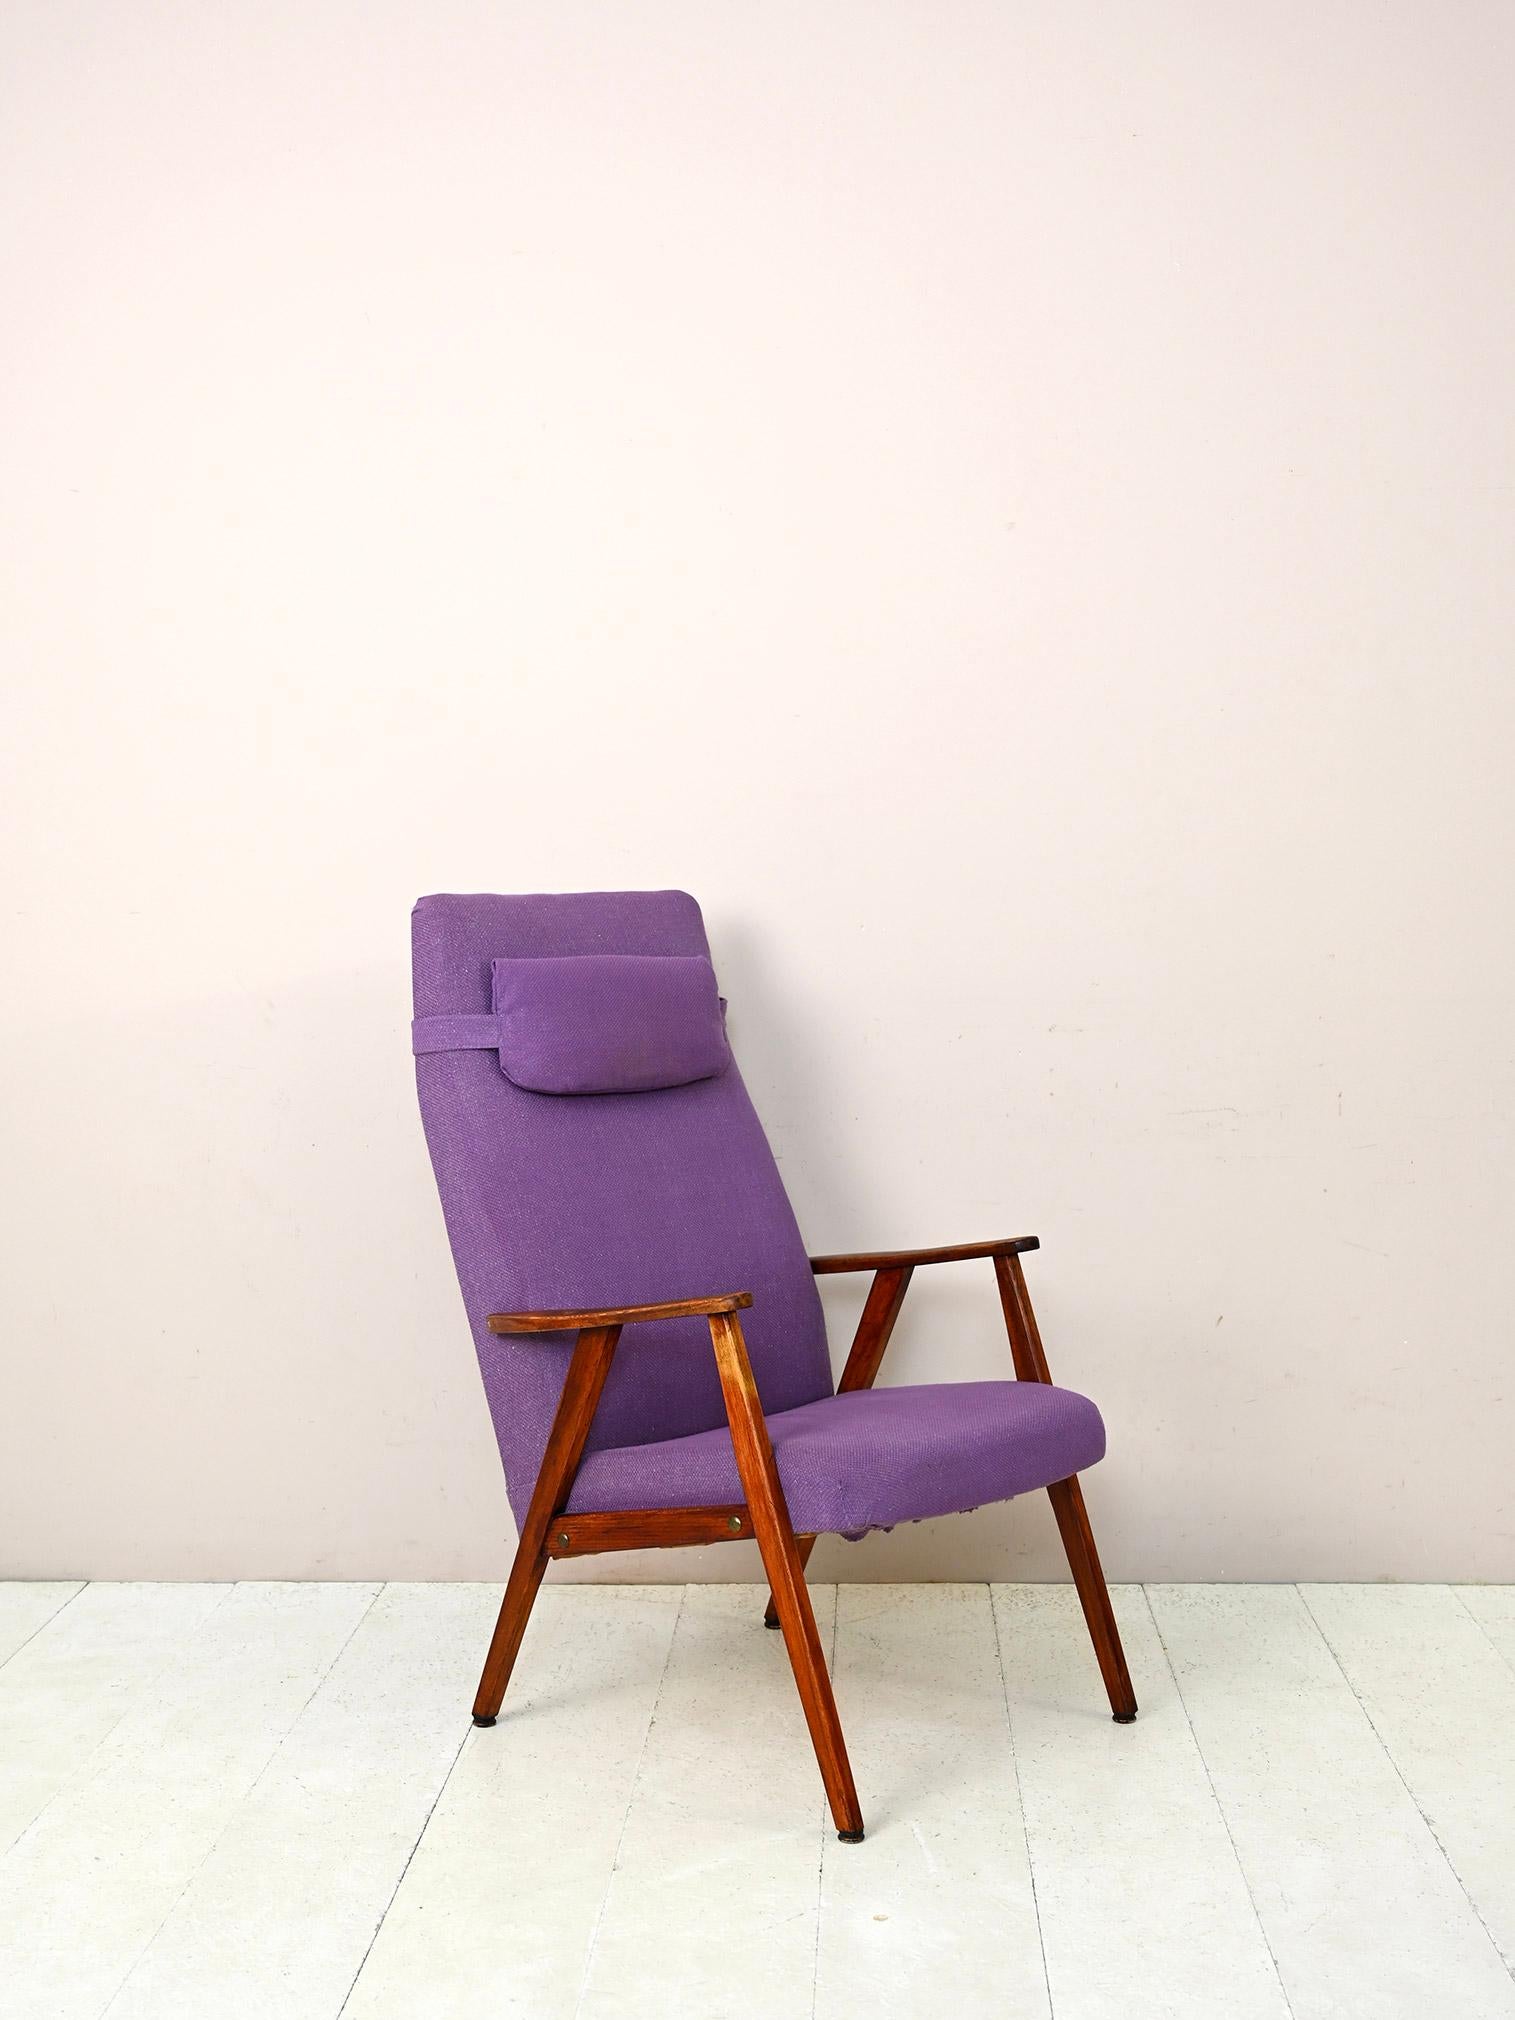 Original vintage 1960s armchair.

A piece of furniture with a modern flavor with a wooden frame and upholstered seat lined with purple fabric. There is also a comfortable headrest cushion that can be removed when needed.
Thanks to the simple lines